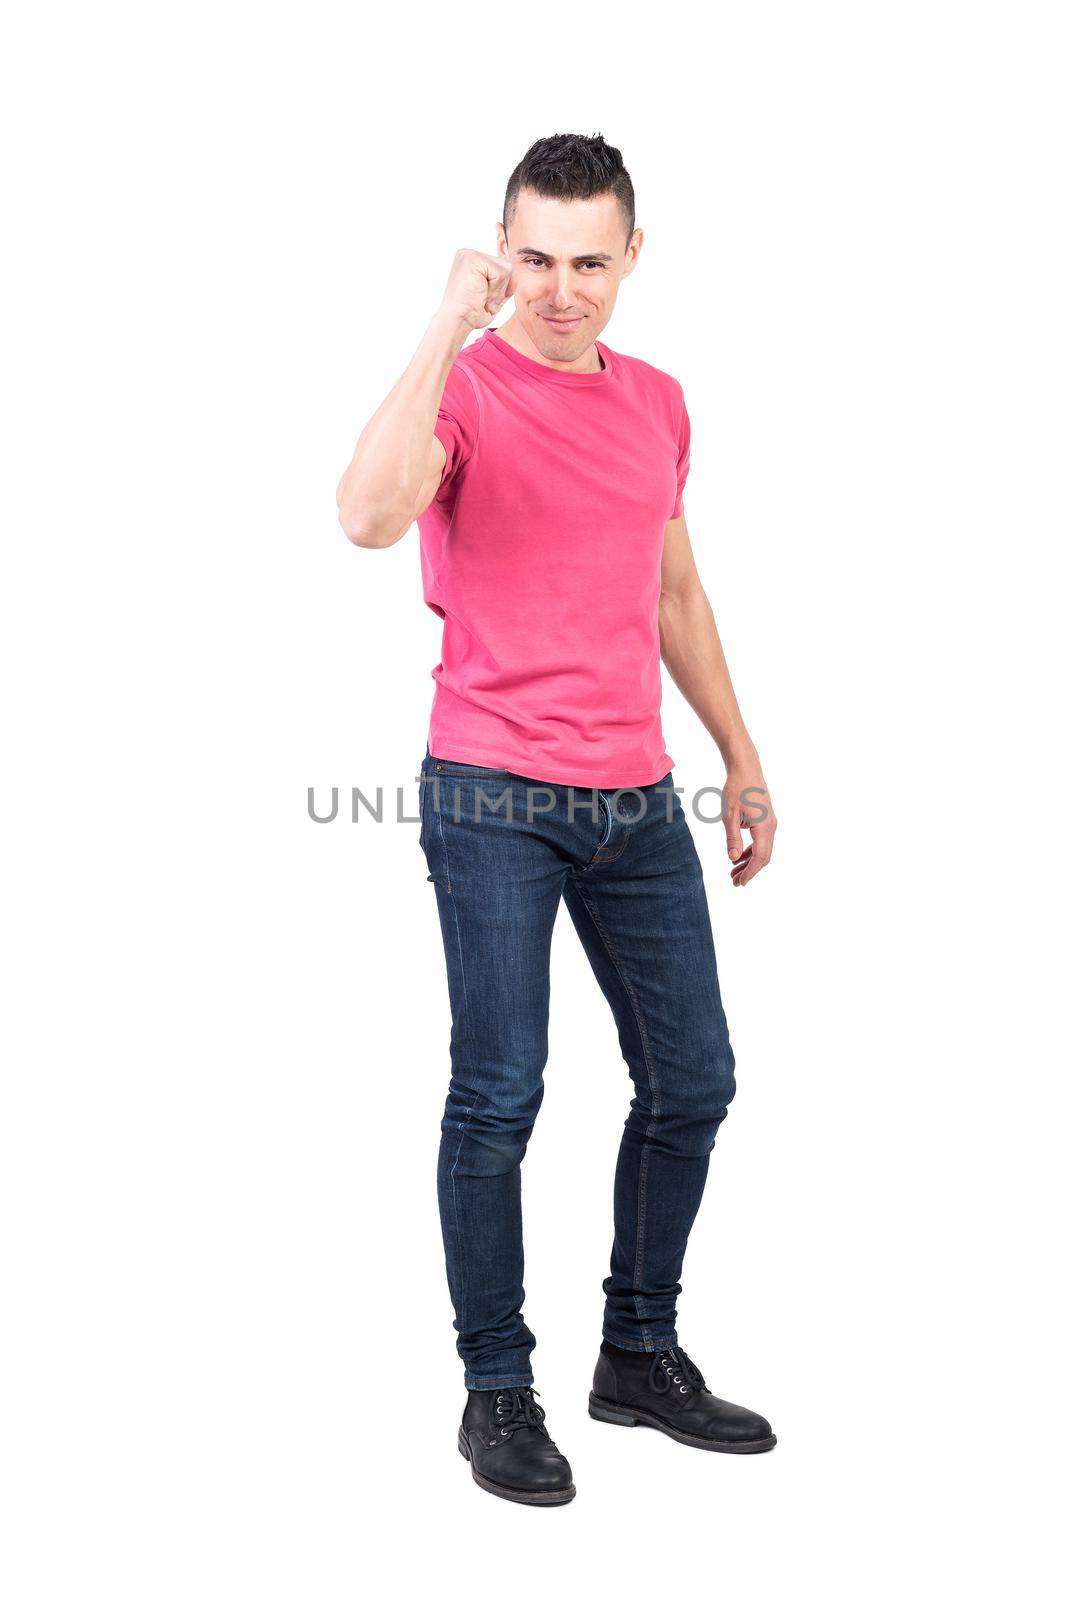 Full body confident male in jeans and pink t shirt looking at camera and clenching fist as sign of success against white background